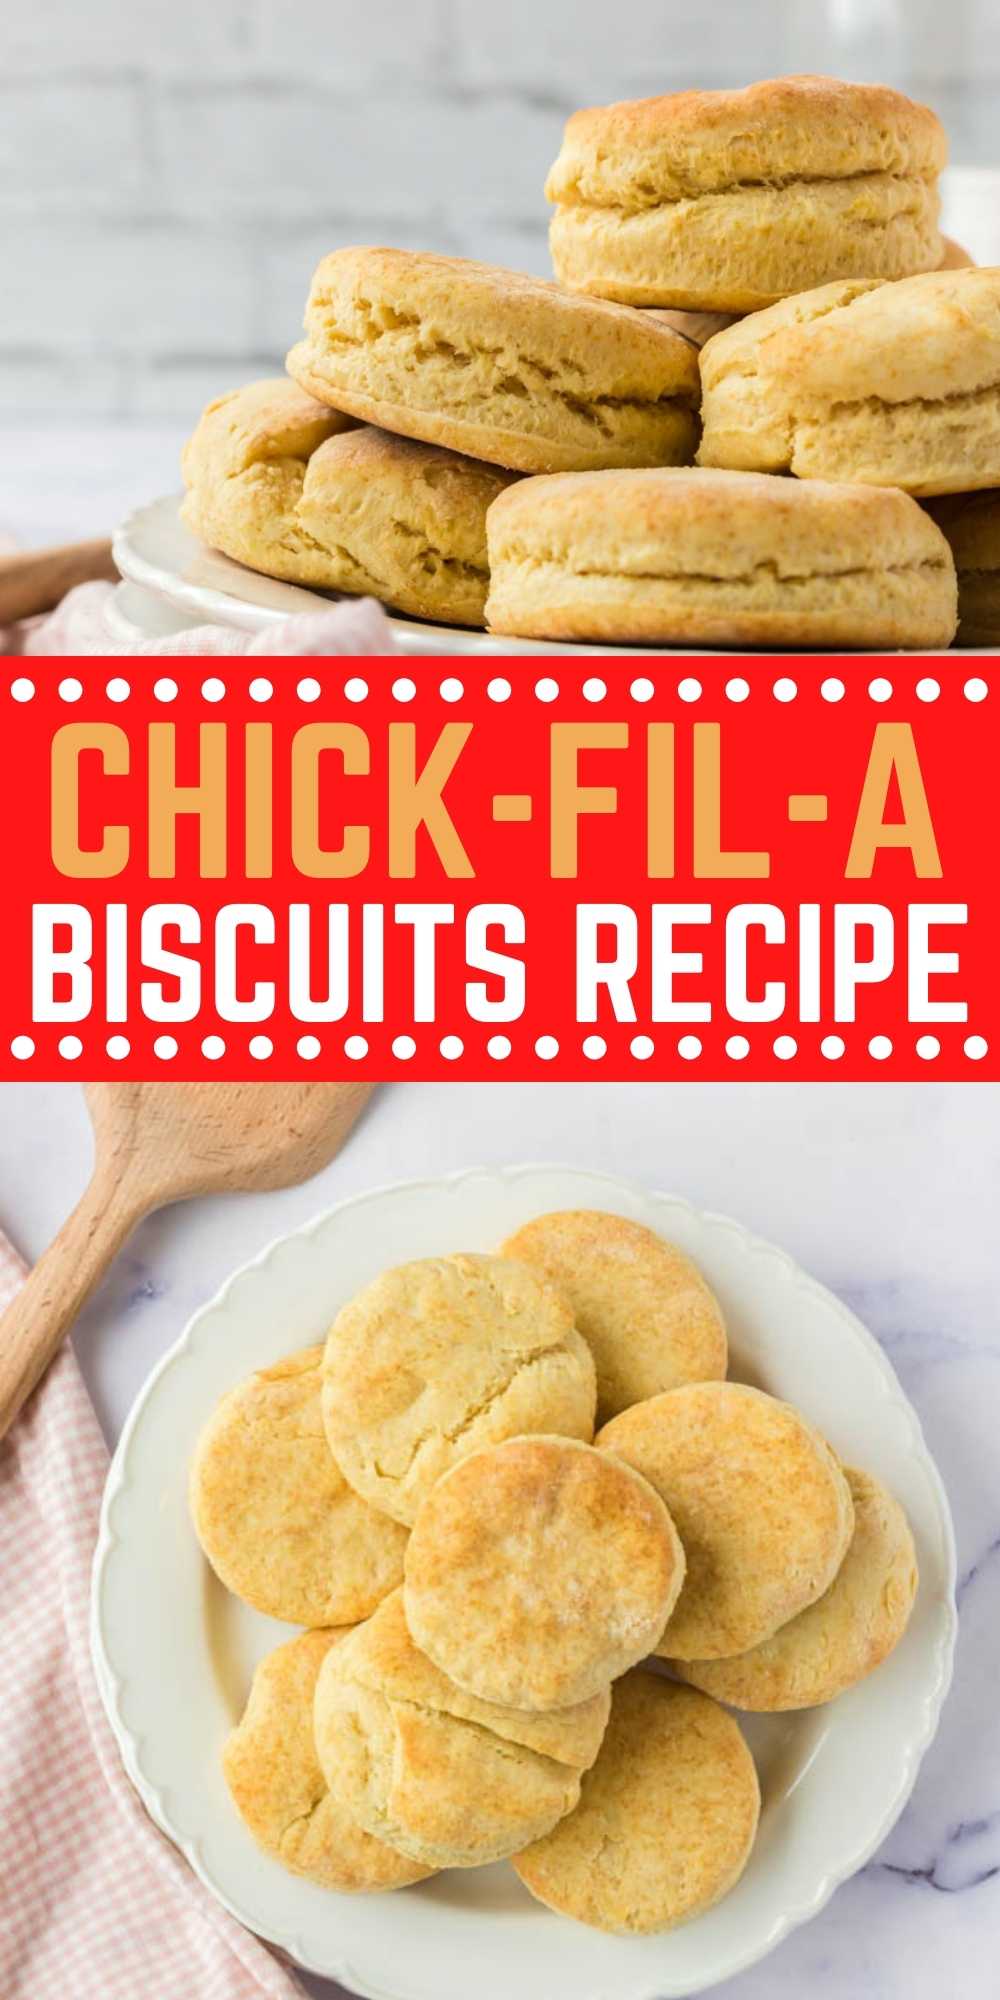 Chick-Fil-A Biscuits are flaky, delicious and made with easy ingredients. This copycat biscuit recipe is easy to make any day of the week. You’ll love these amazing biscuits that are easy to make at home! #eatingonadime #copycatrecipes #chickfilarecipes #biscuitrecipes 